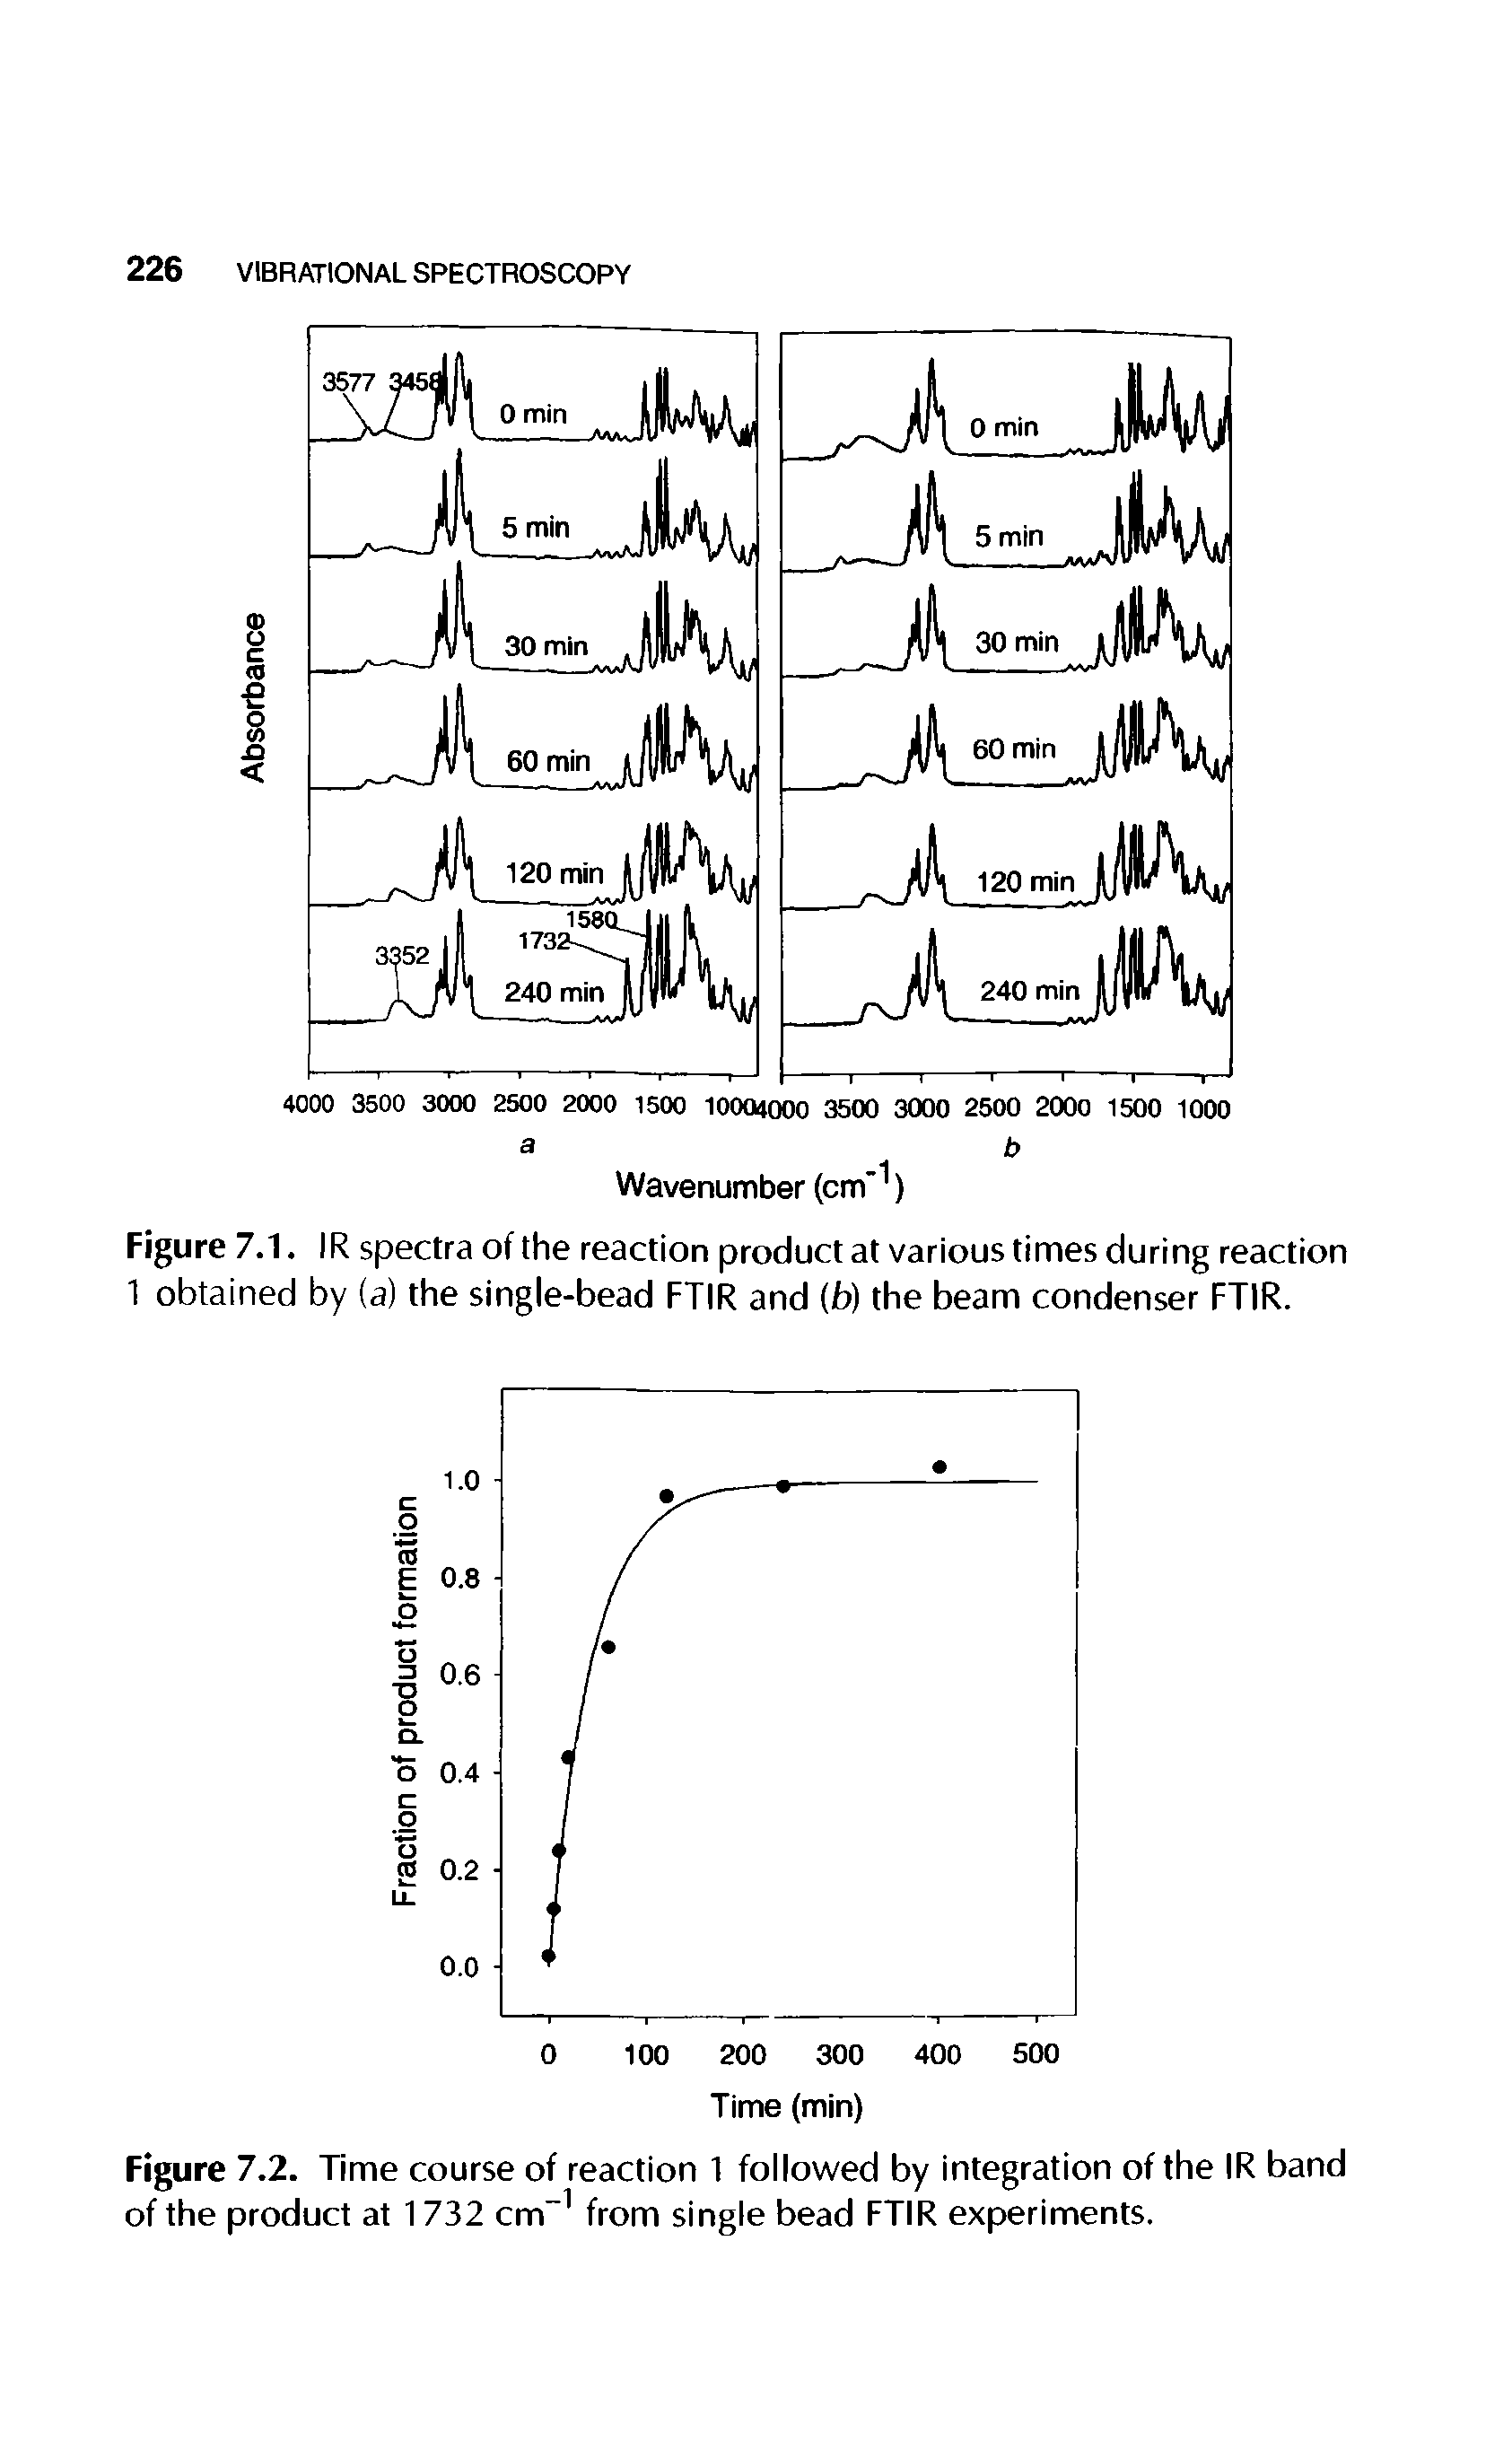 Figure 7.2. Time course of reaction 1 followed by integration of the IR band of the product at 1732 cm-1 from single bead FTIR experiments.